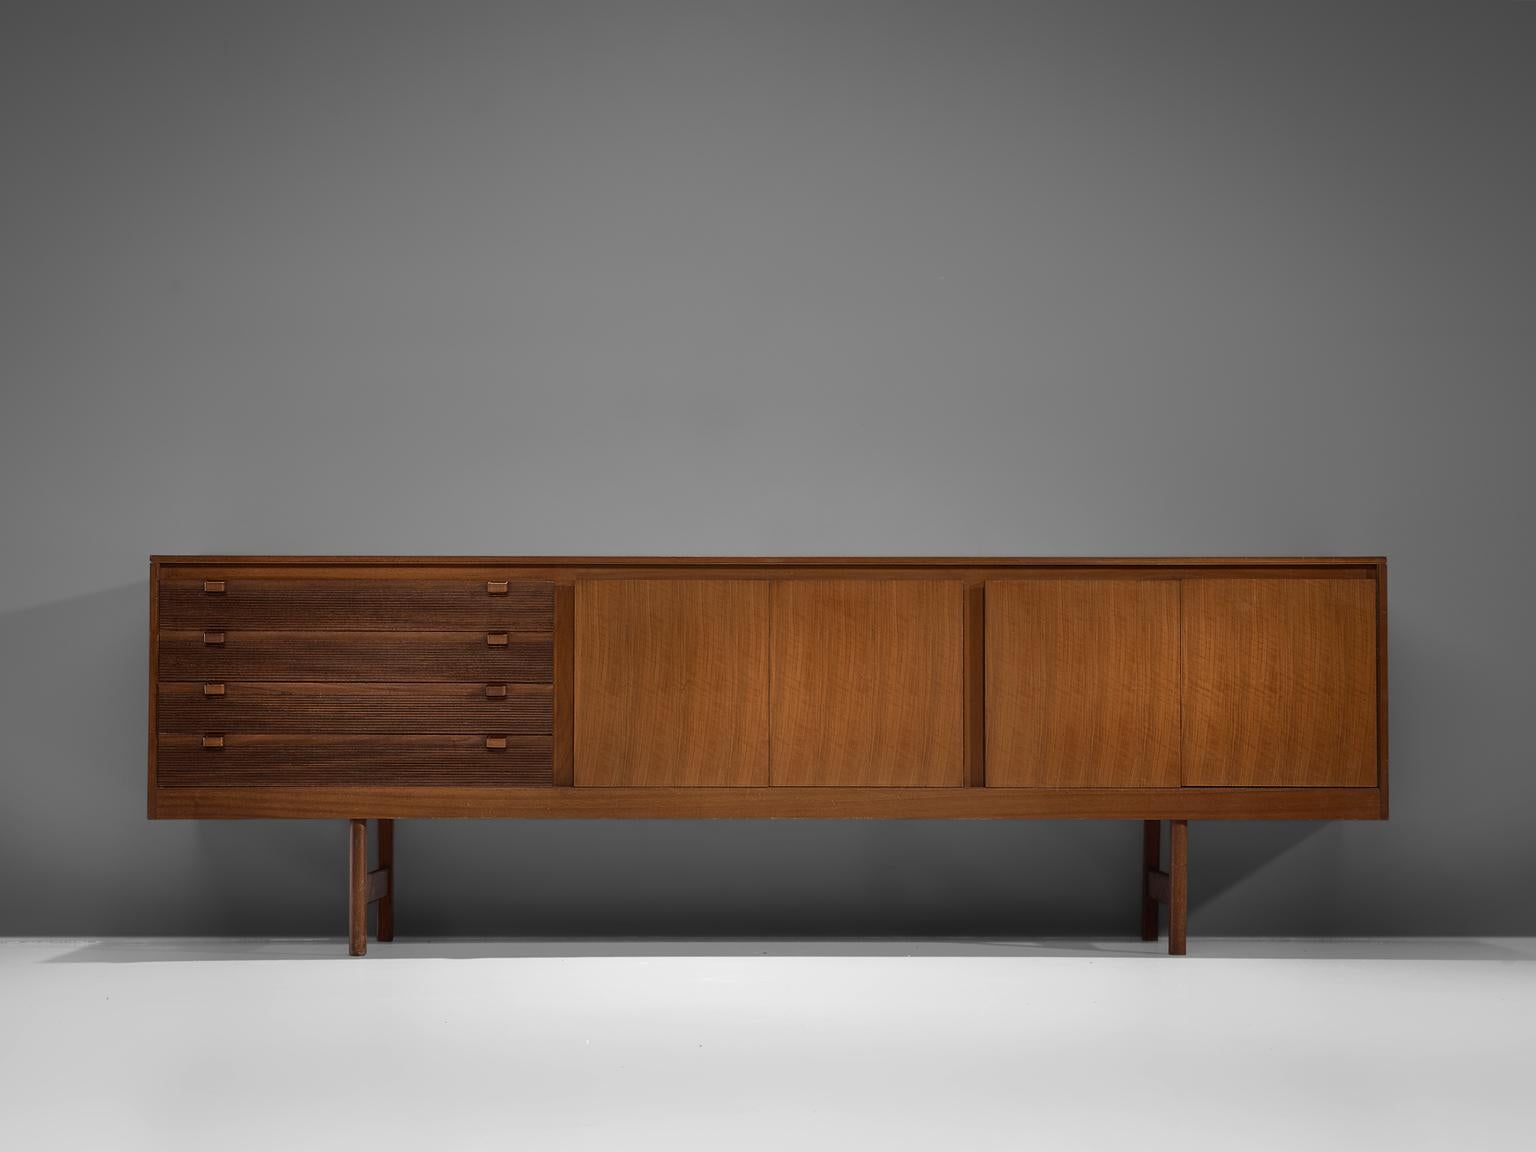 Robert Heritage for archie shine, sideboard, walnut, England, 1960s

This sideboard is equipped with a drawer section with 4 drawers and a large storage unit. The drawers are detailed with ridged fronts and wooden handles based on straight legs.